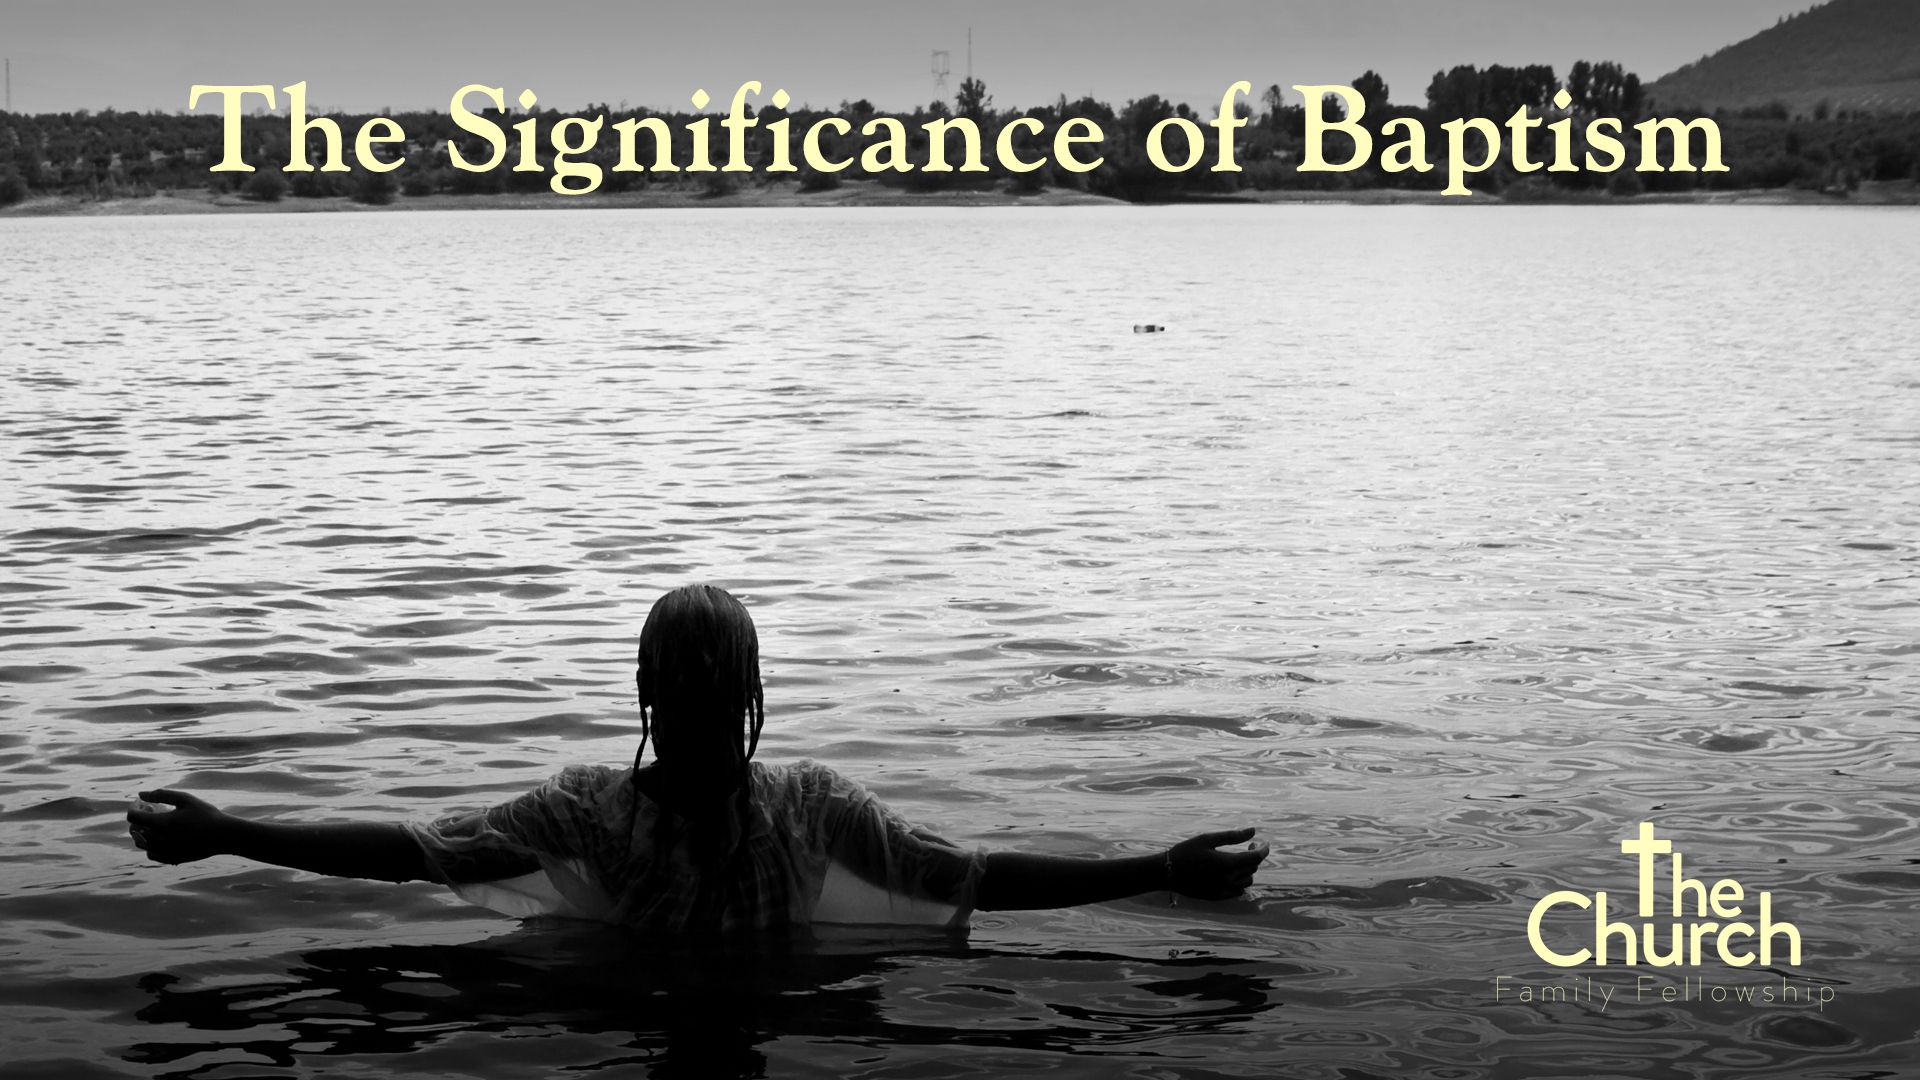 The Significance of Baptism